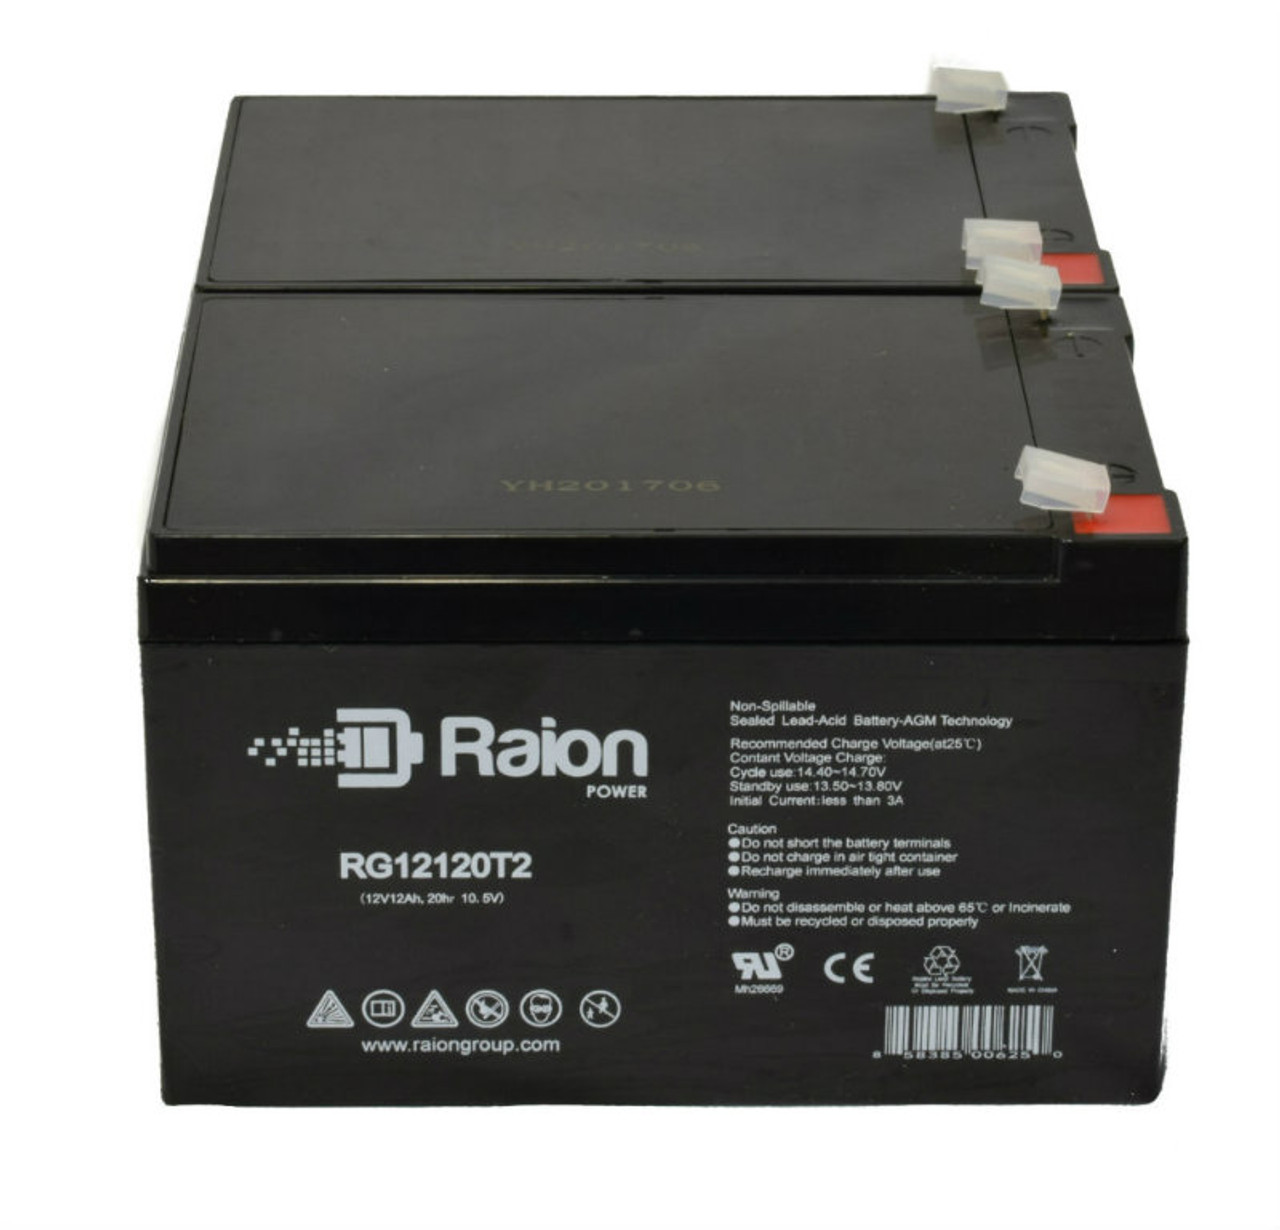 Raion Power 12V 12Ah Replacement Alarm Security System Battery for Altronix AL400ULXPD16 - 2 Pack